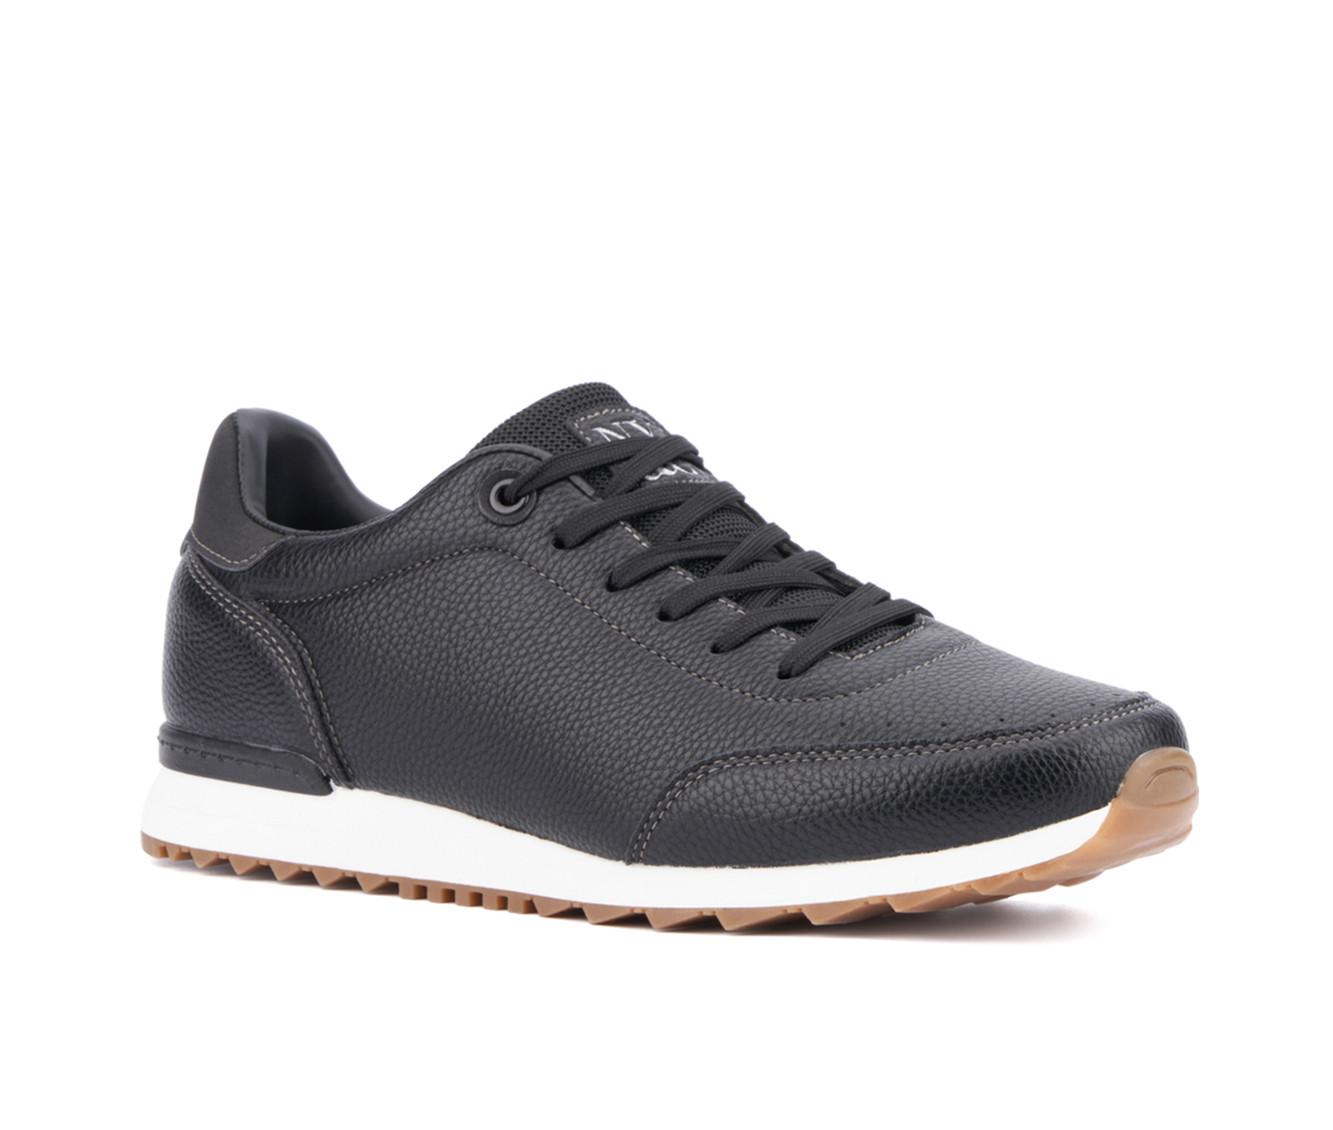 Men's New York and Company Anwar Casual Oxfords